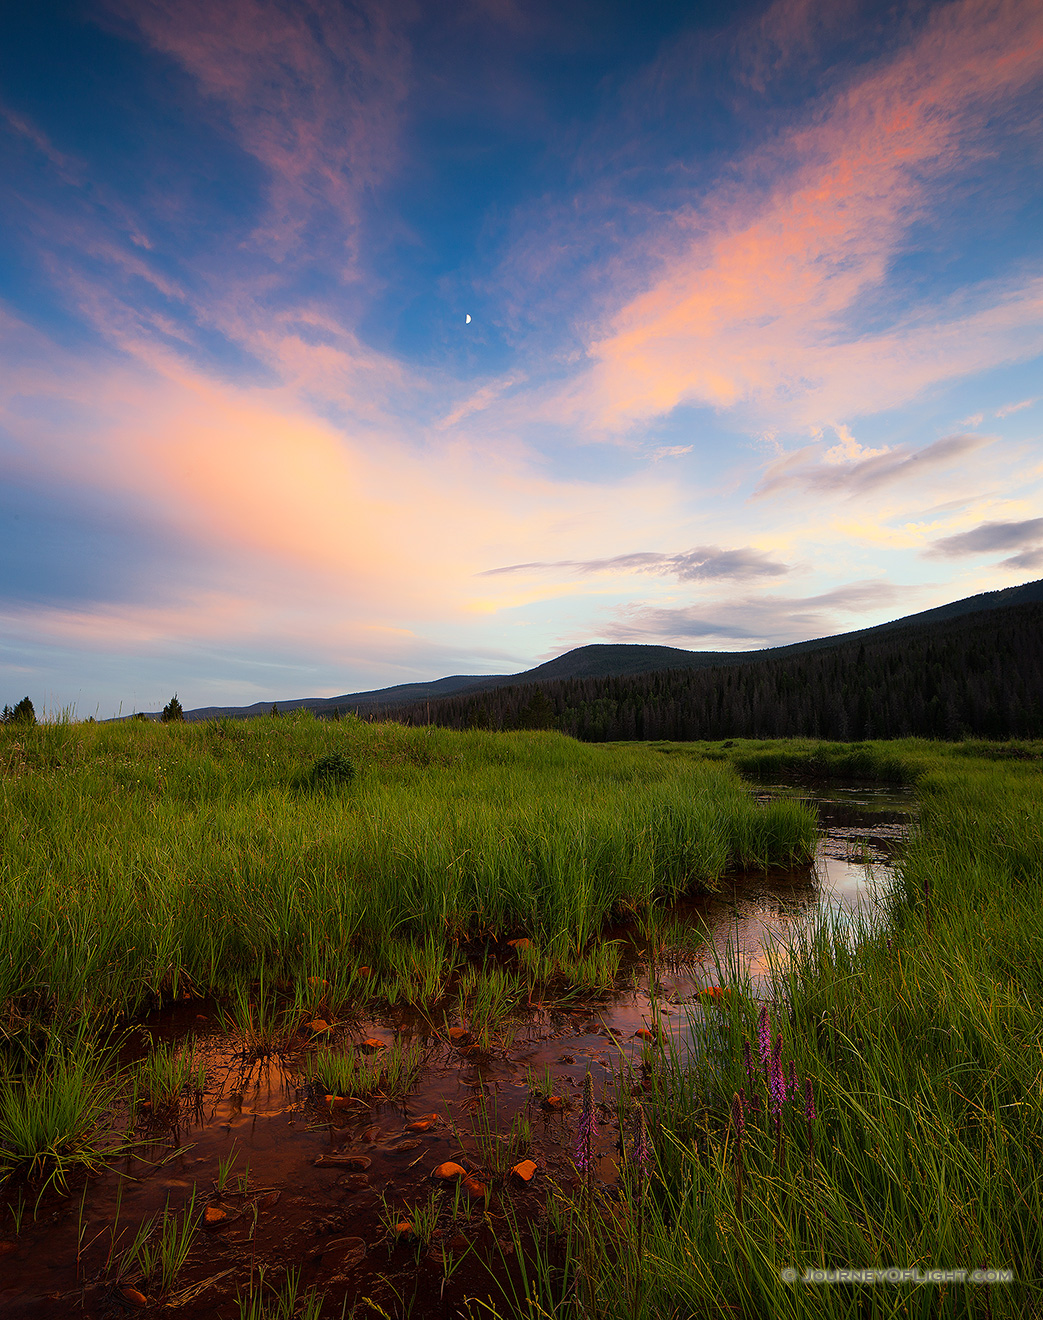 The Kawuneeche Valley is a marshy meadow area on the western side of Rocky Mountain National Park in Colorado. In the native Arapaho language Kawuneeche means “valley of the coyote” and indeed, many animals are found traveling through the valley. On this still July evening, there was a herd of elk that had quietly moved through and were eating on the trail. Not wanting to disturb them too much I kindly asked them to move as I slowly walked by. They obliged and I was on my way, as the last remnants of light illuminated the western edge of the clouds casting a dull glow across the meadow. - Colorado Picture